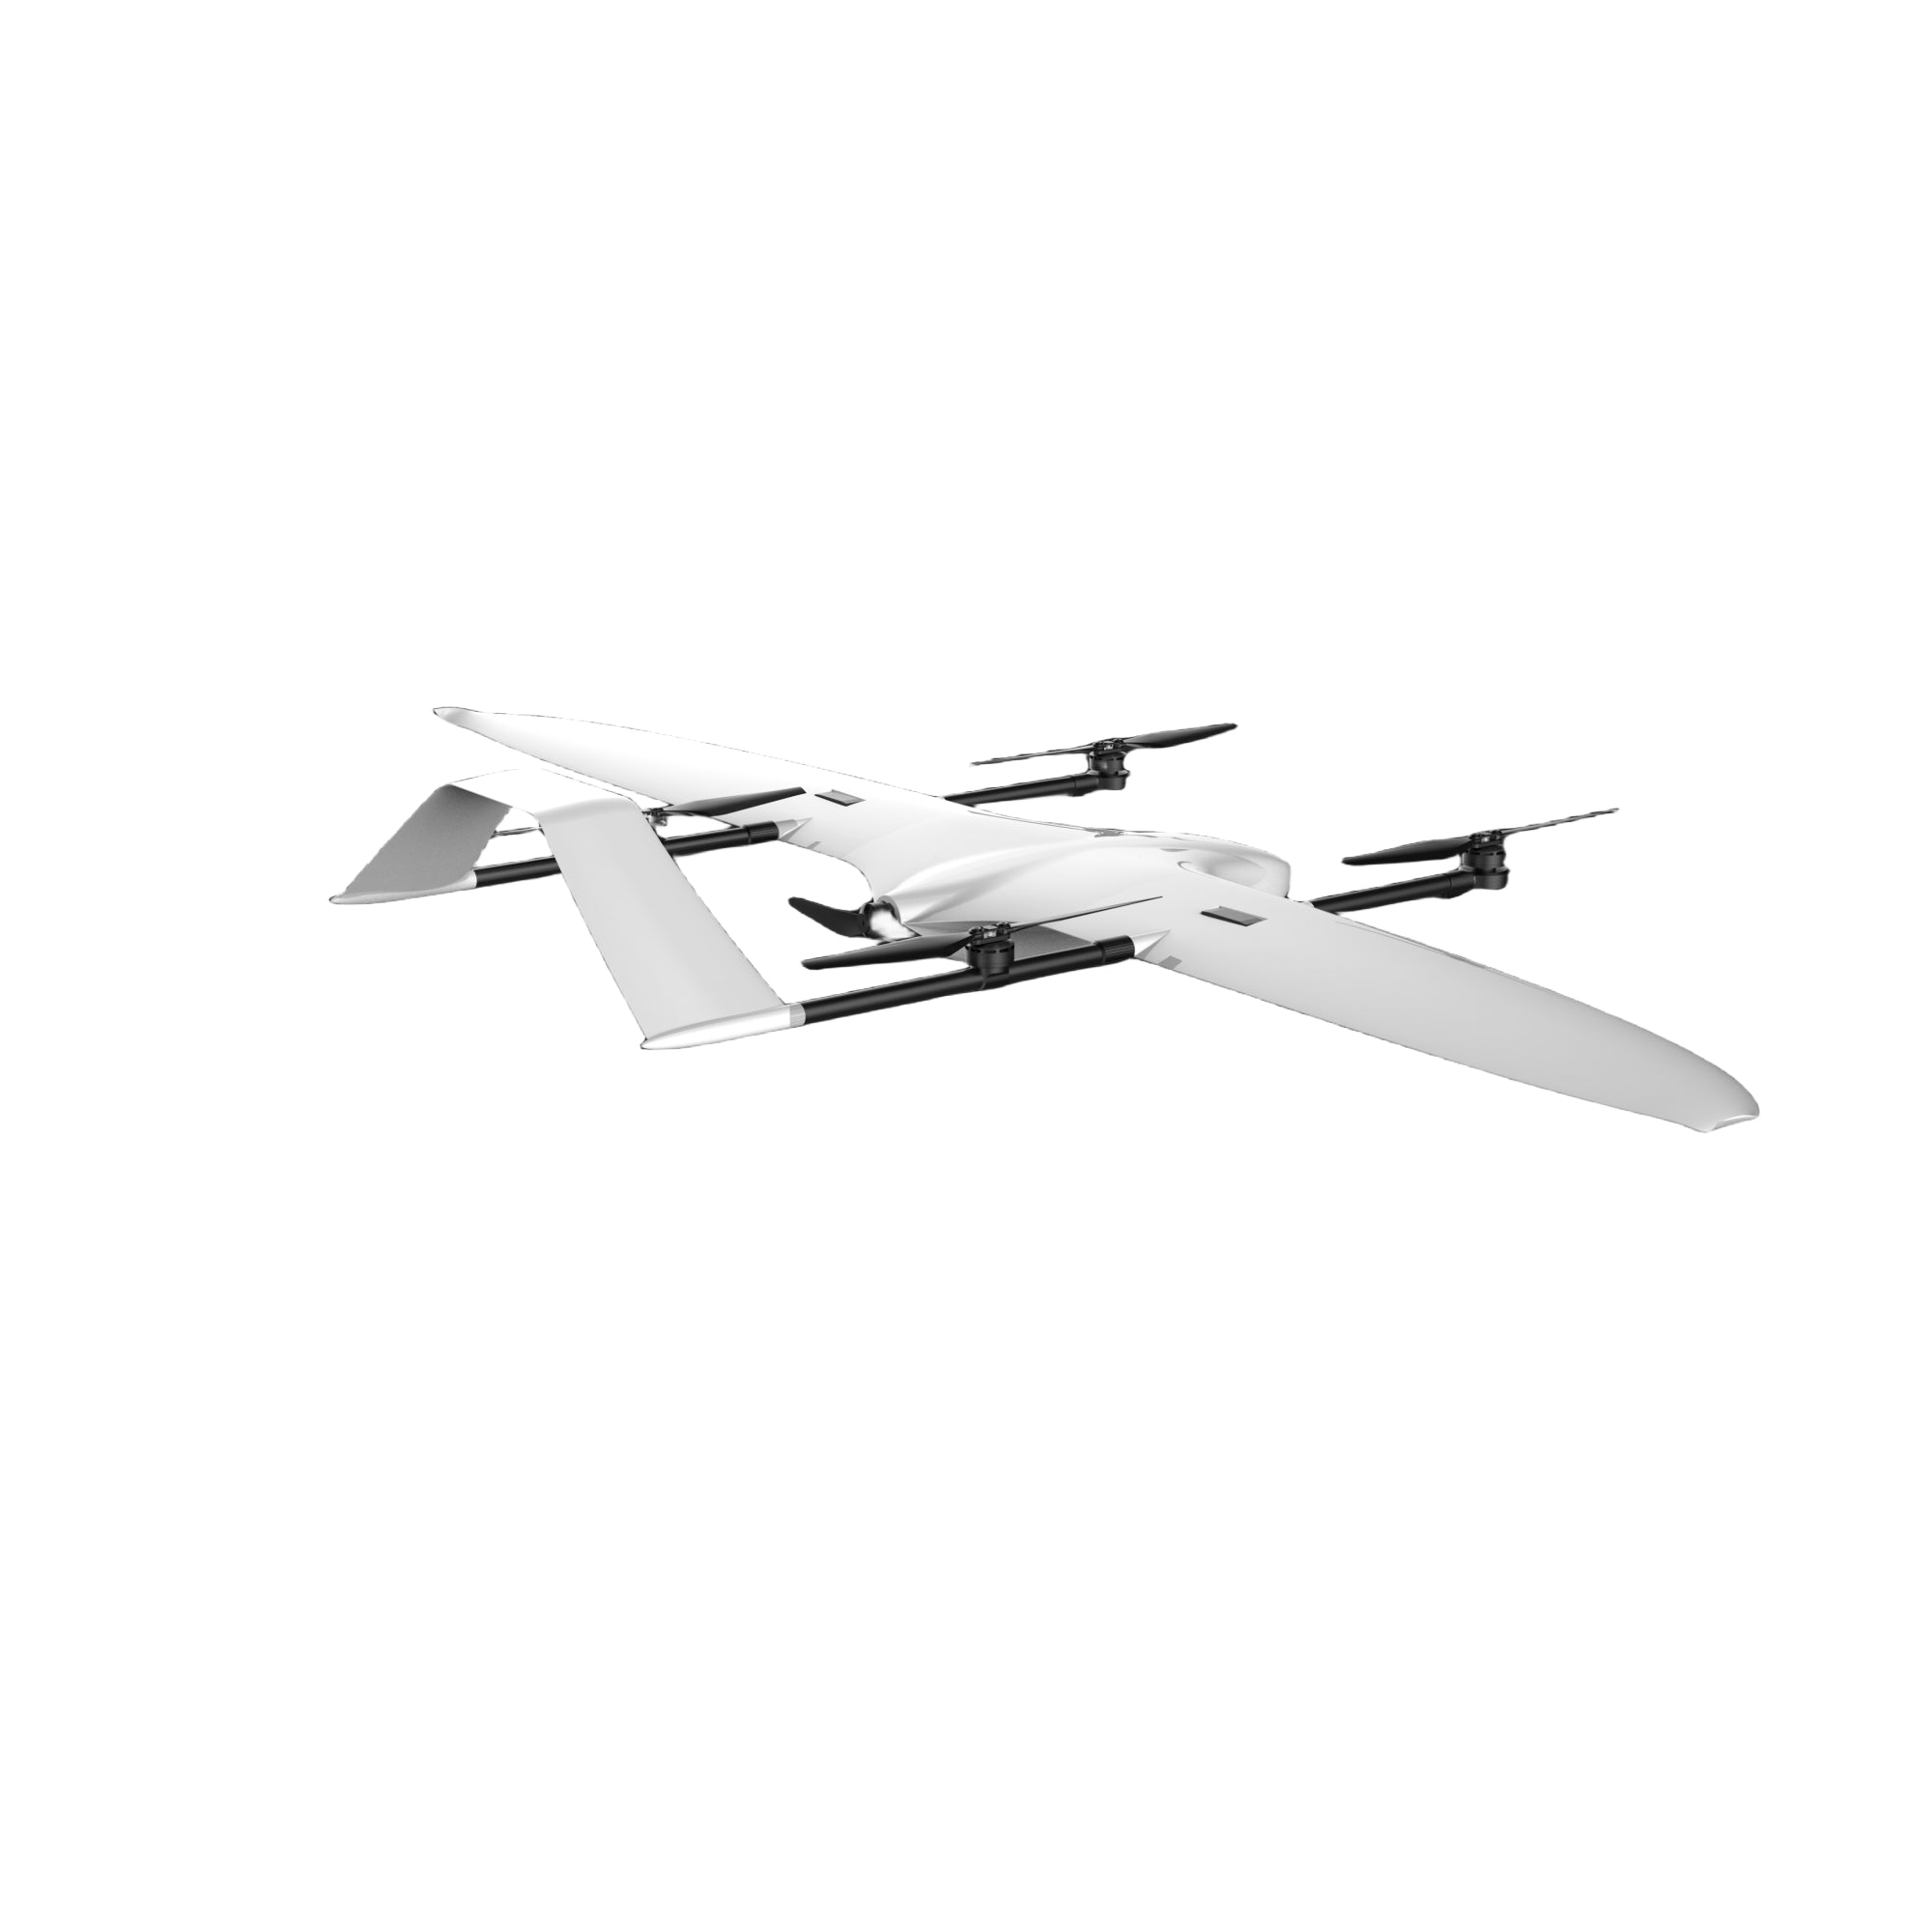 UnmannedRC Swift VTOL Plane For Drone Mapping and Aerial Surveying - Unmanned RC